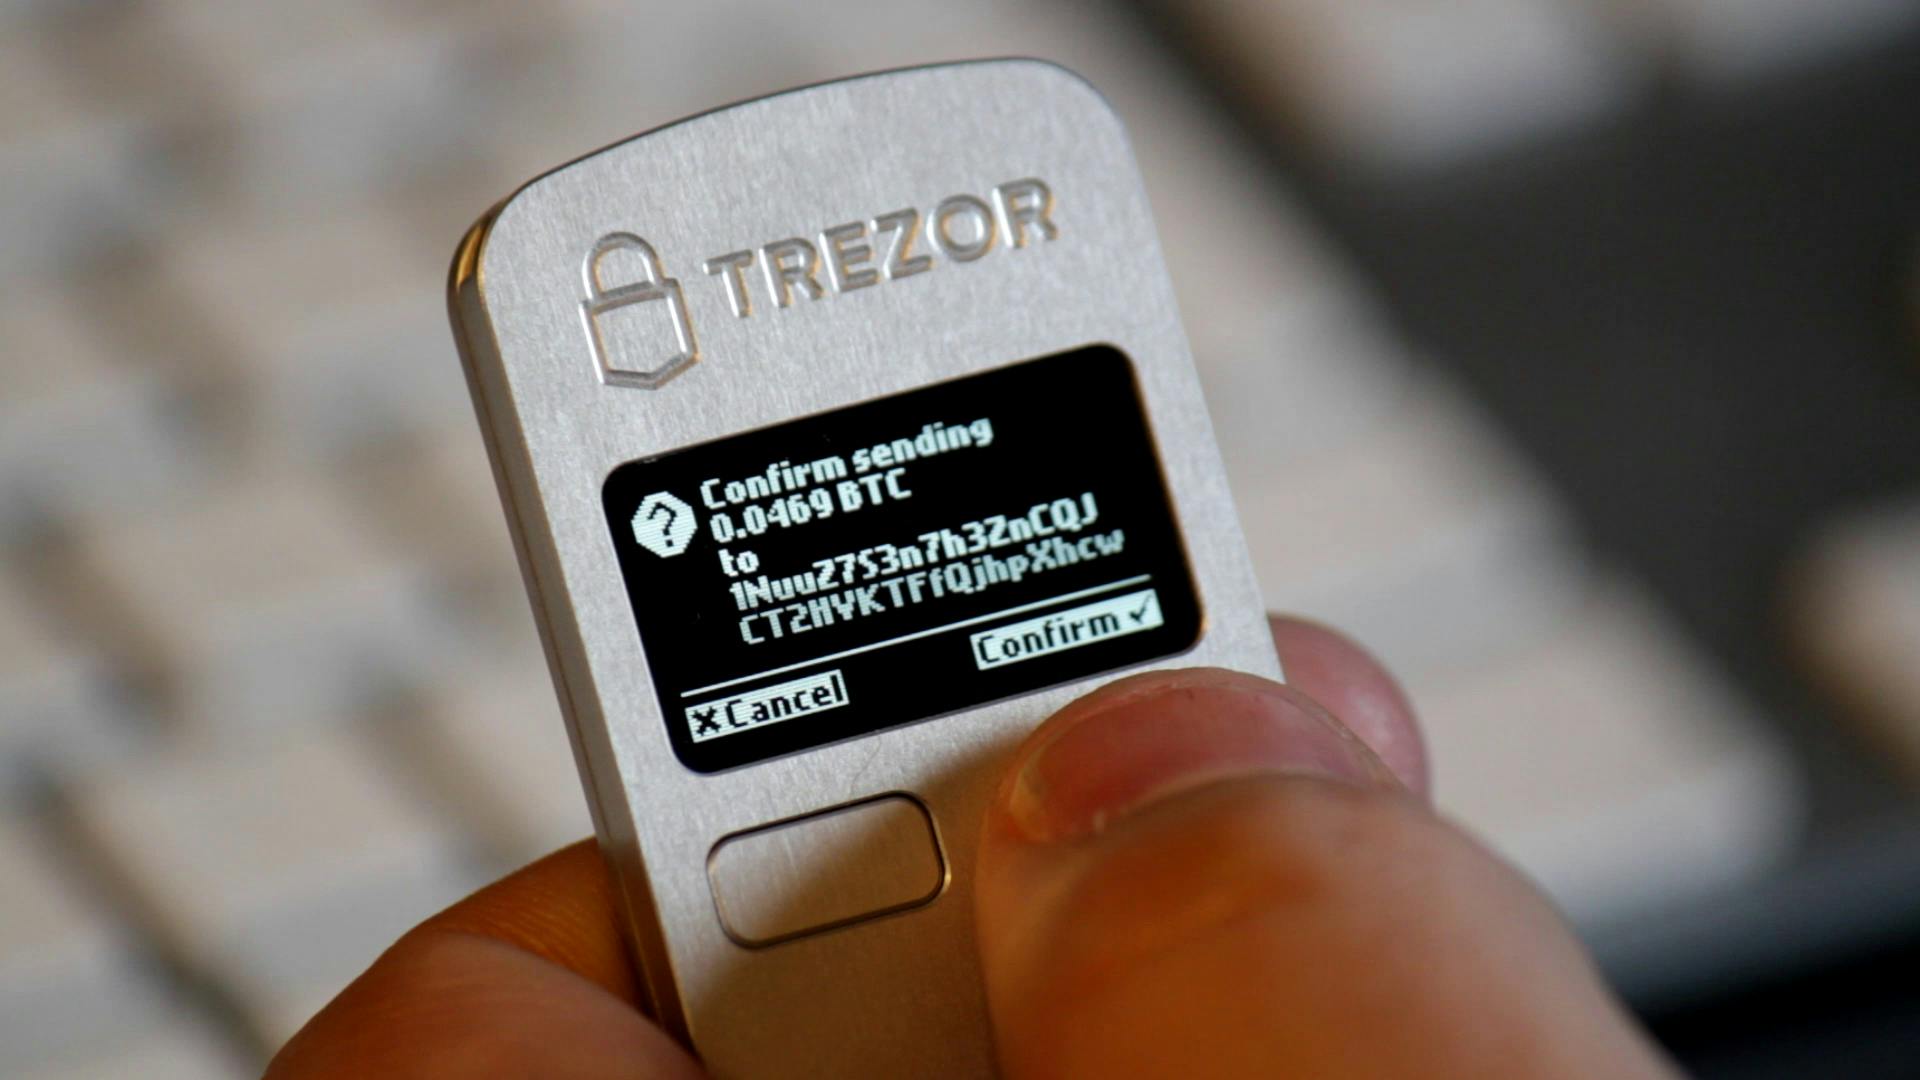 Trezor Wallet: The World's First Hardware Wallet to store